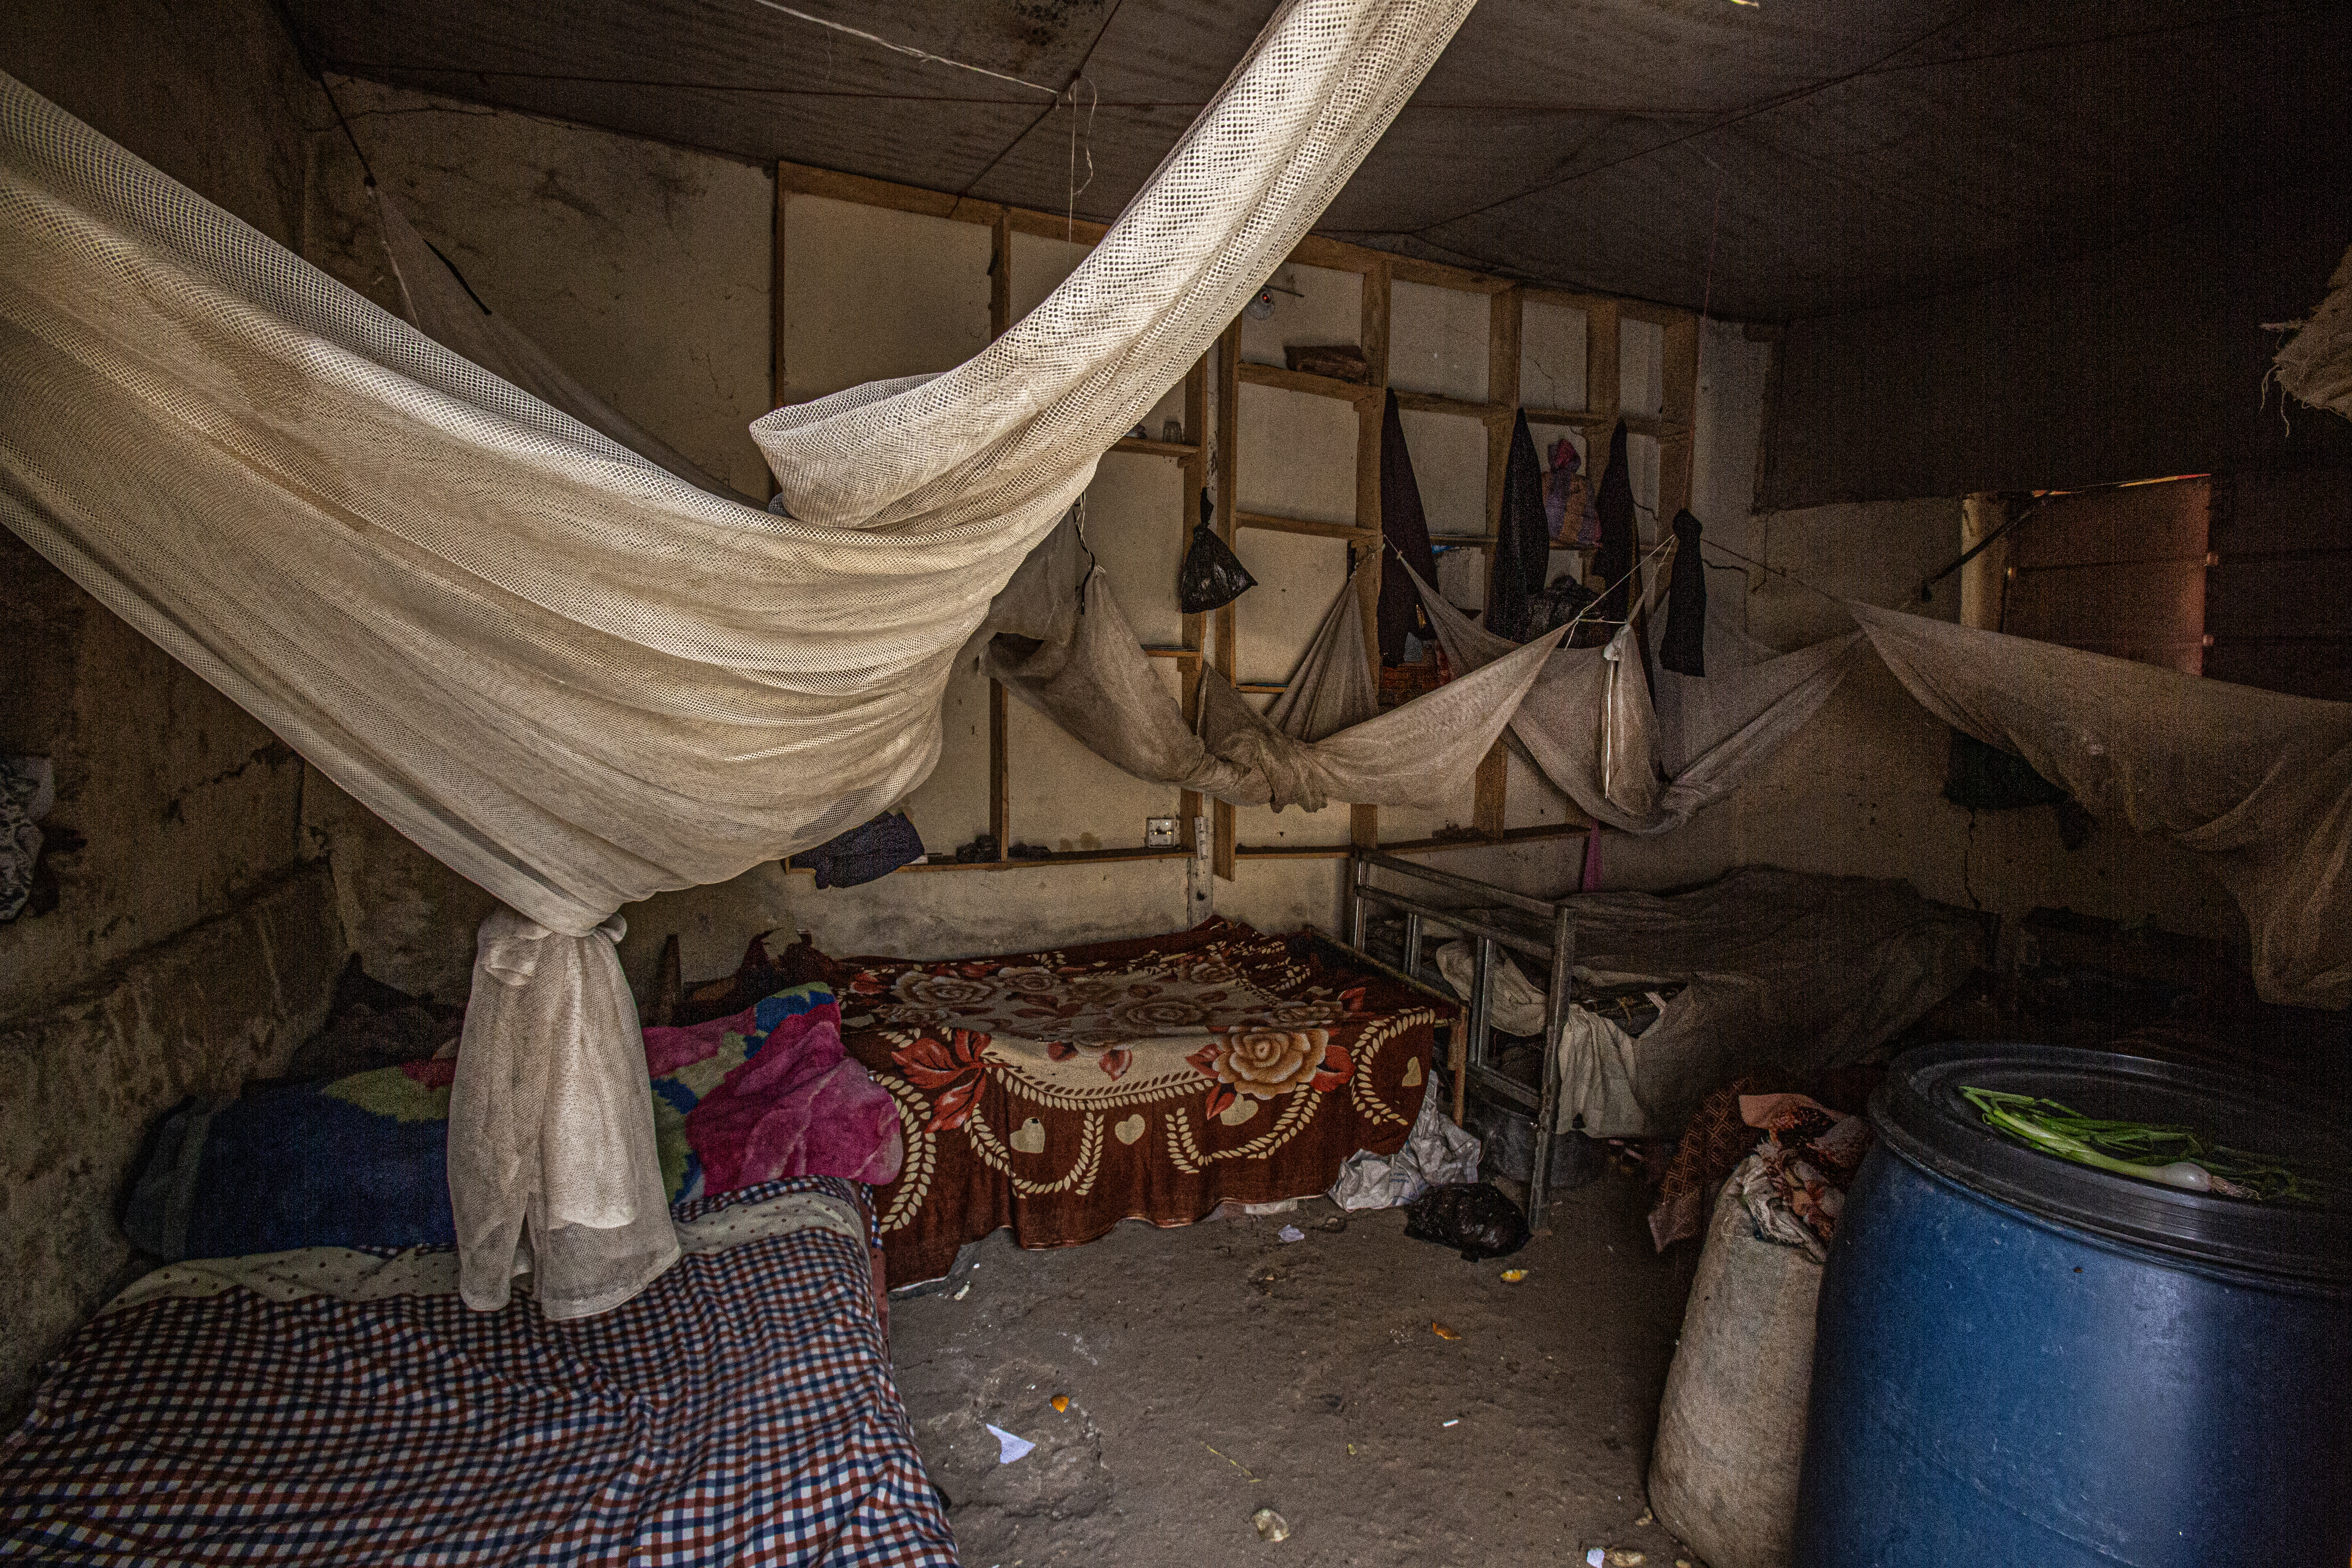  Makeshift shelter of displaced people in the University of Zalingei, Central Darfur state, Sudan.